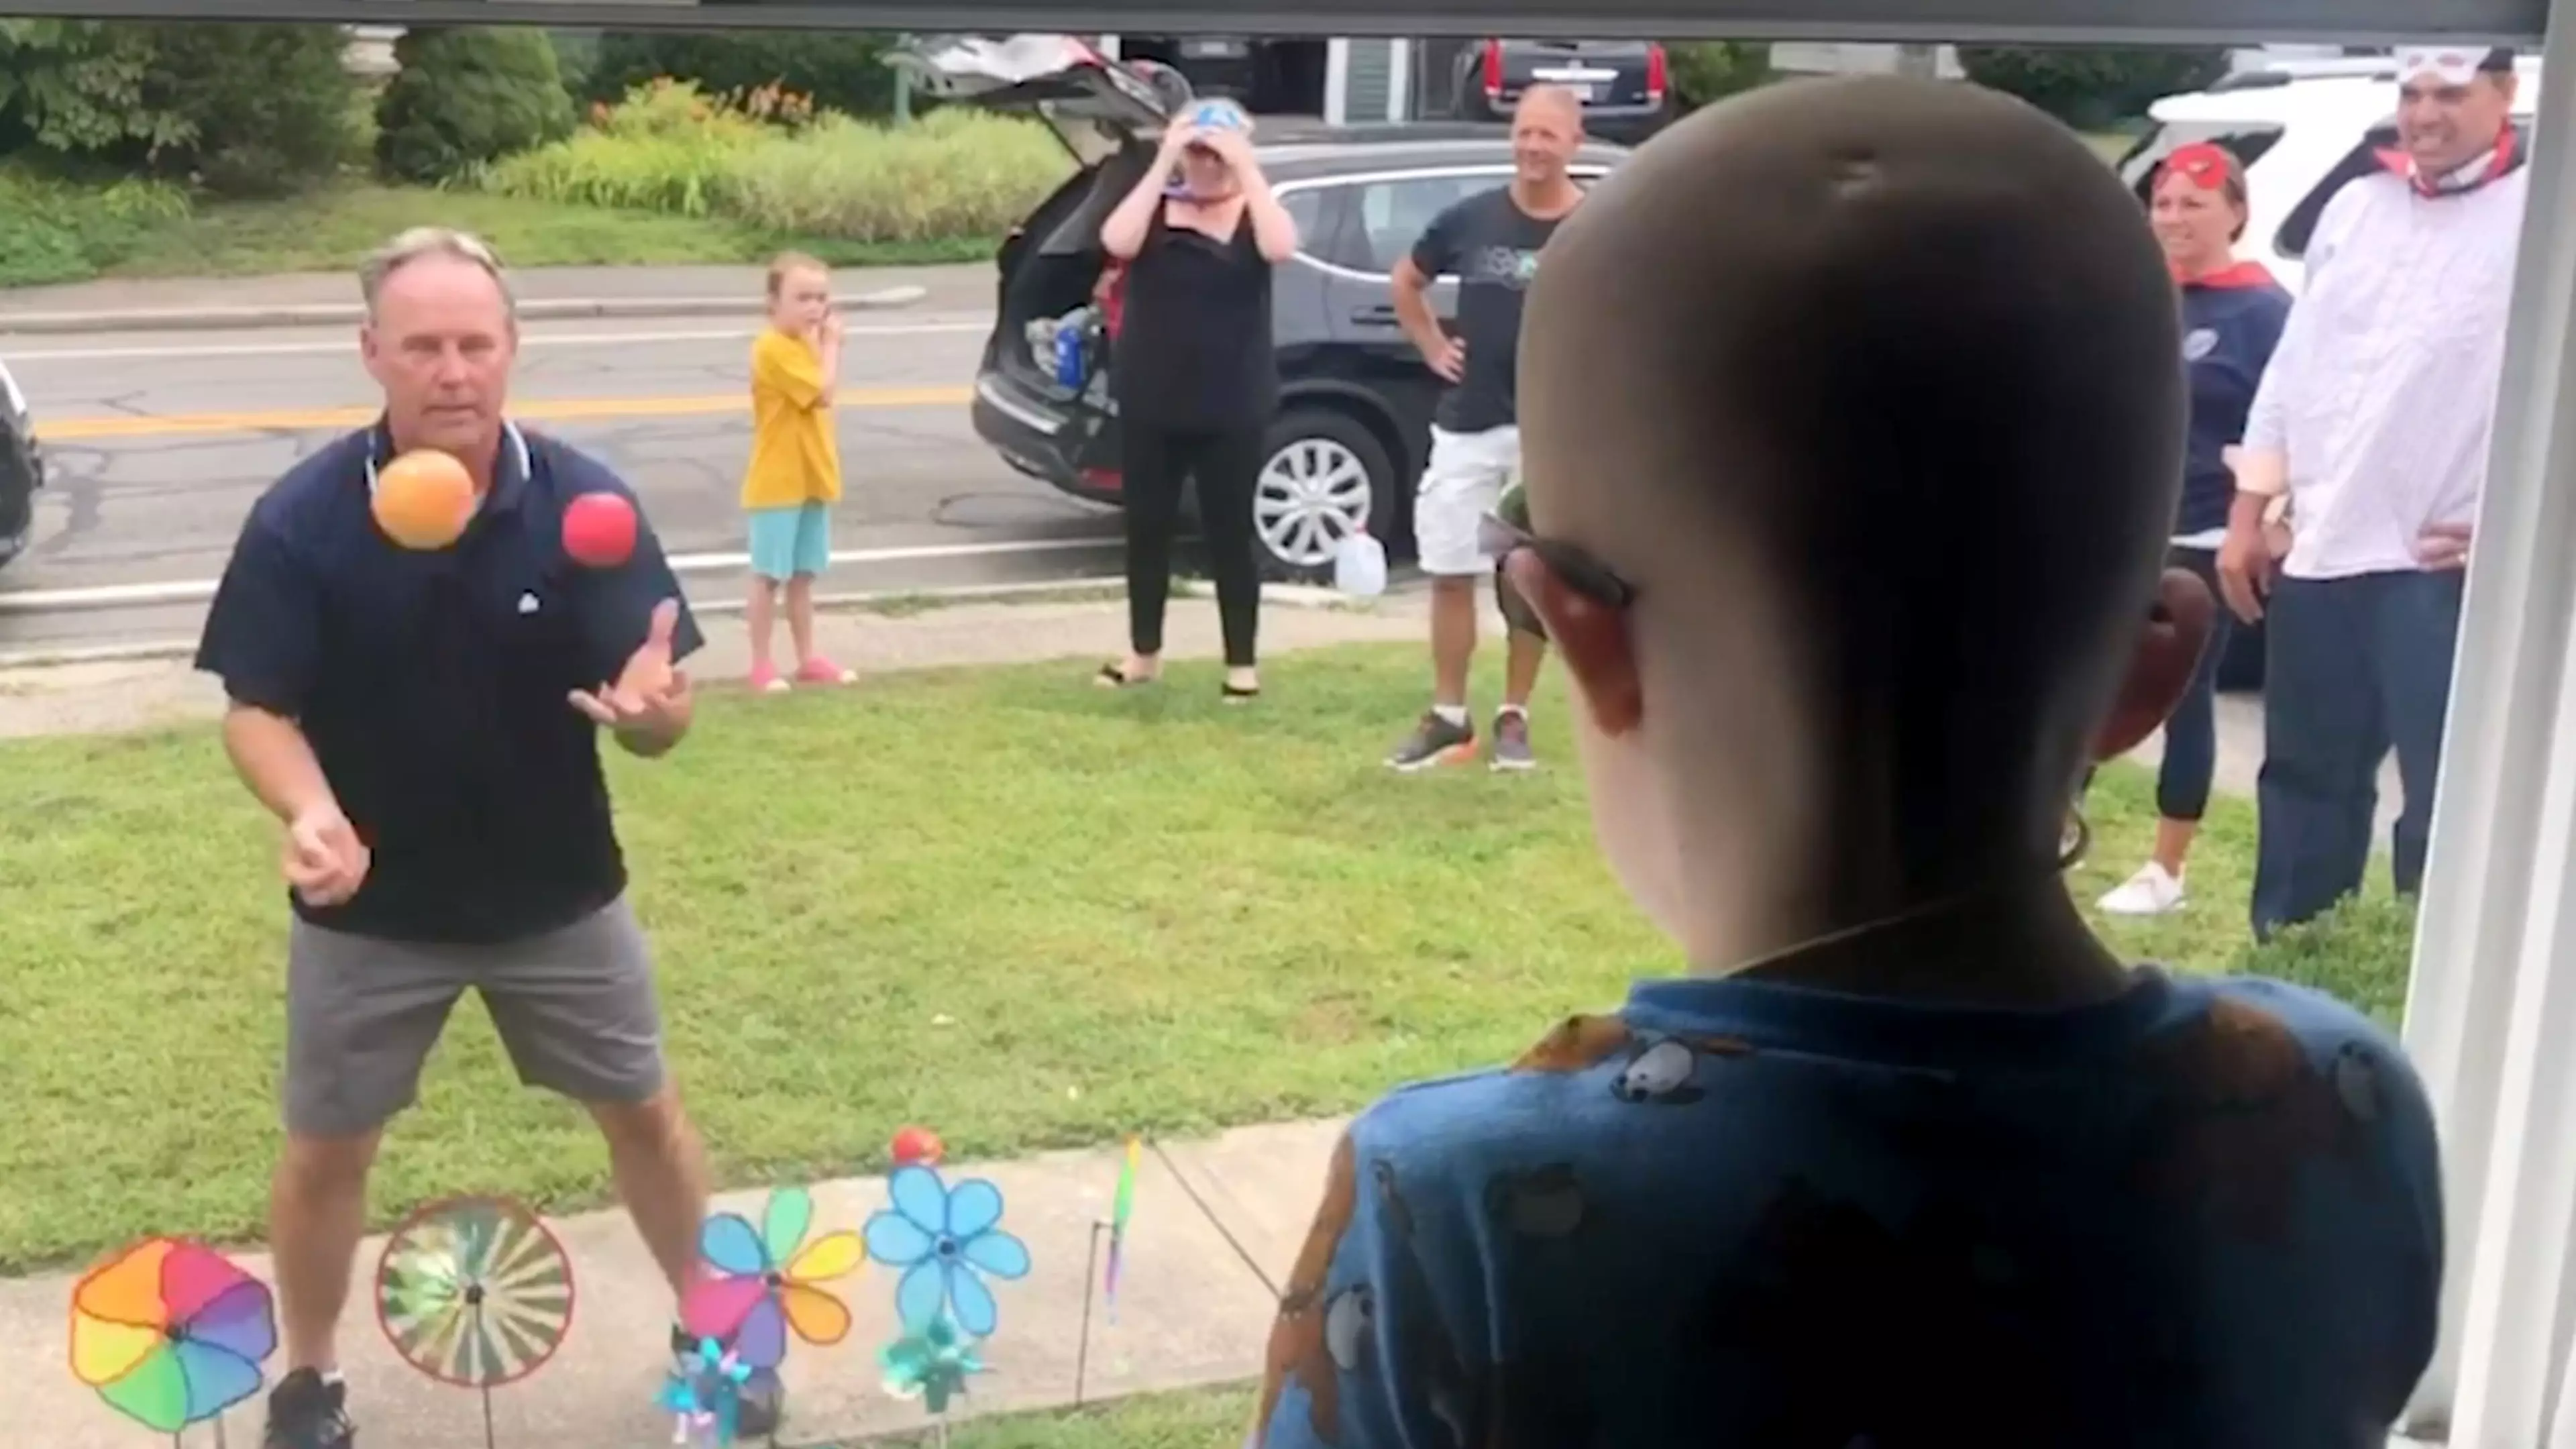 Neighbours Put On A Show For Housebound Boy With Cancer By Performing Magic Tricks And Singing Songs